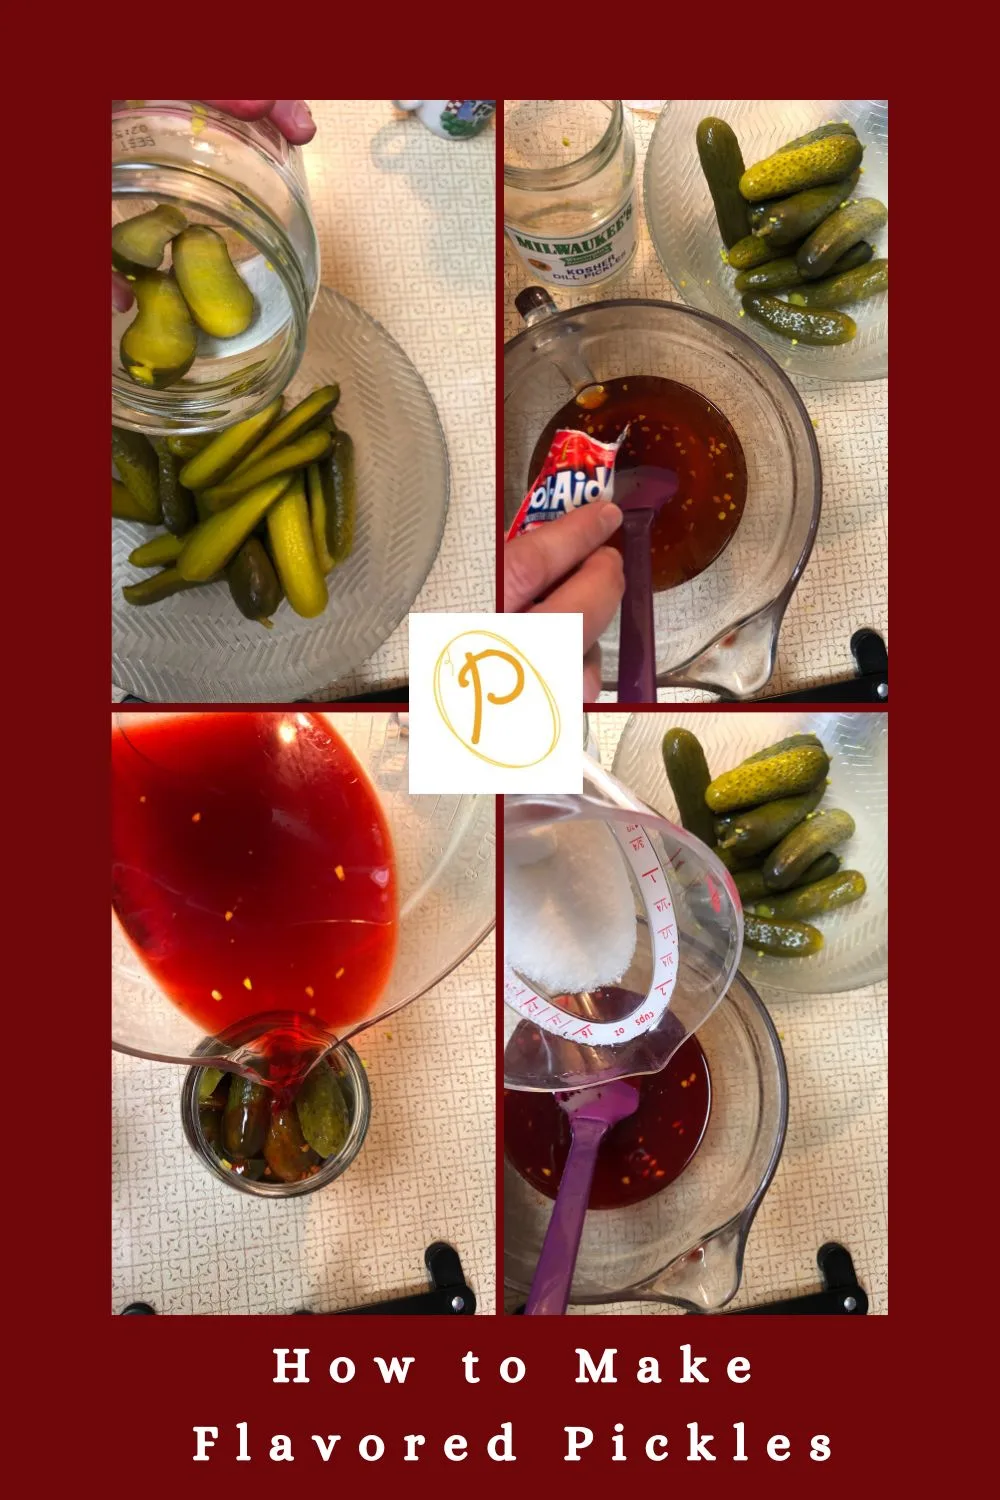 How to Make Flavored Pickles